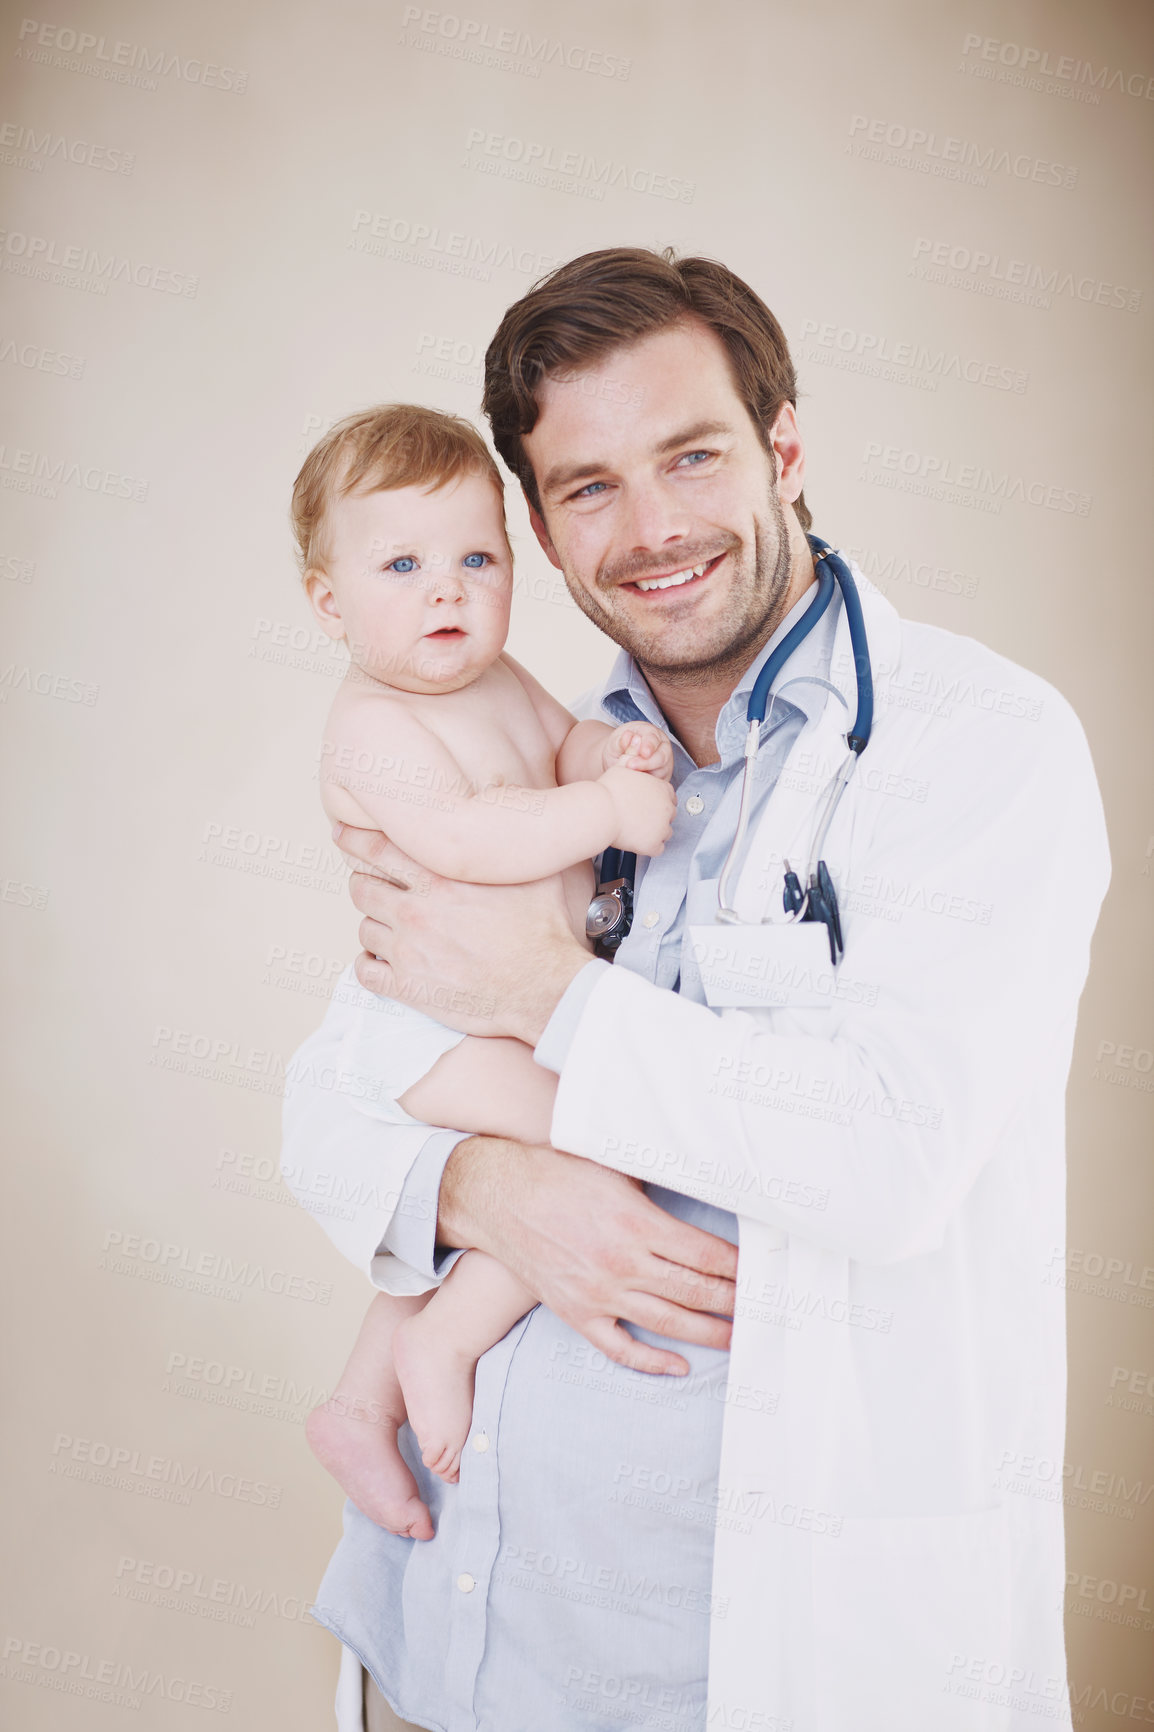 Buy stock photo Portrait of a male doctor holding an infant girl in his arms